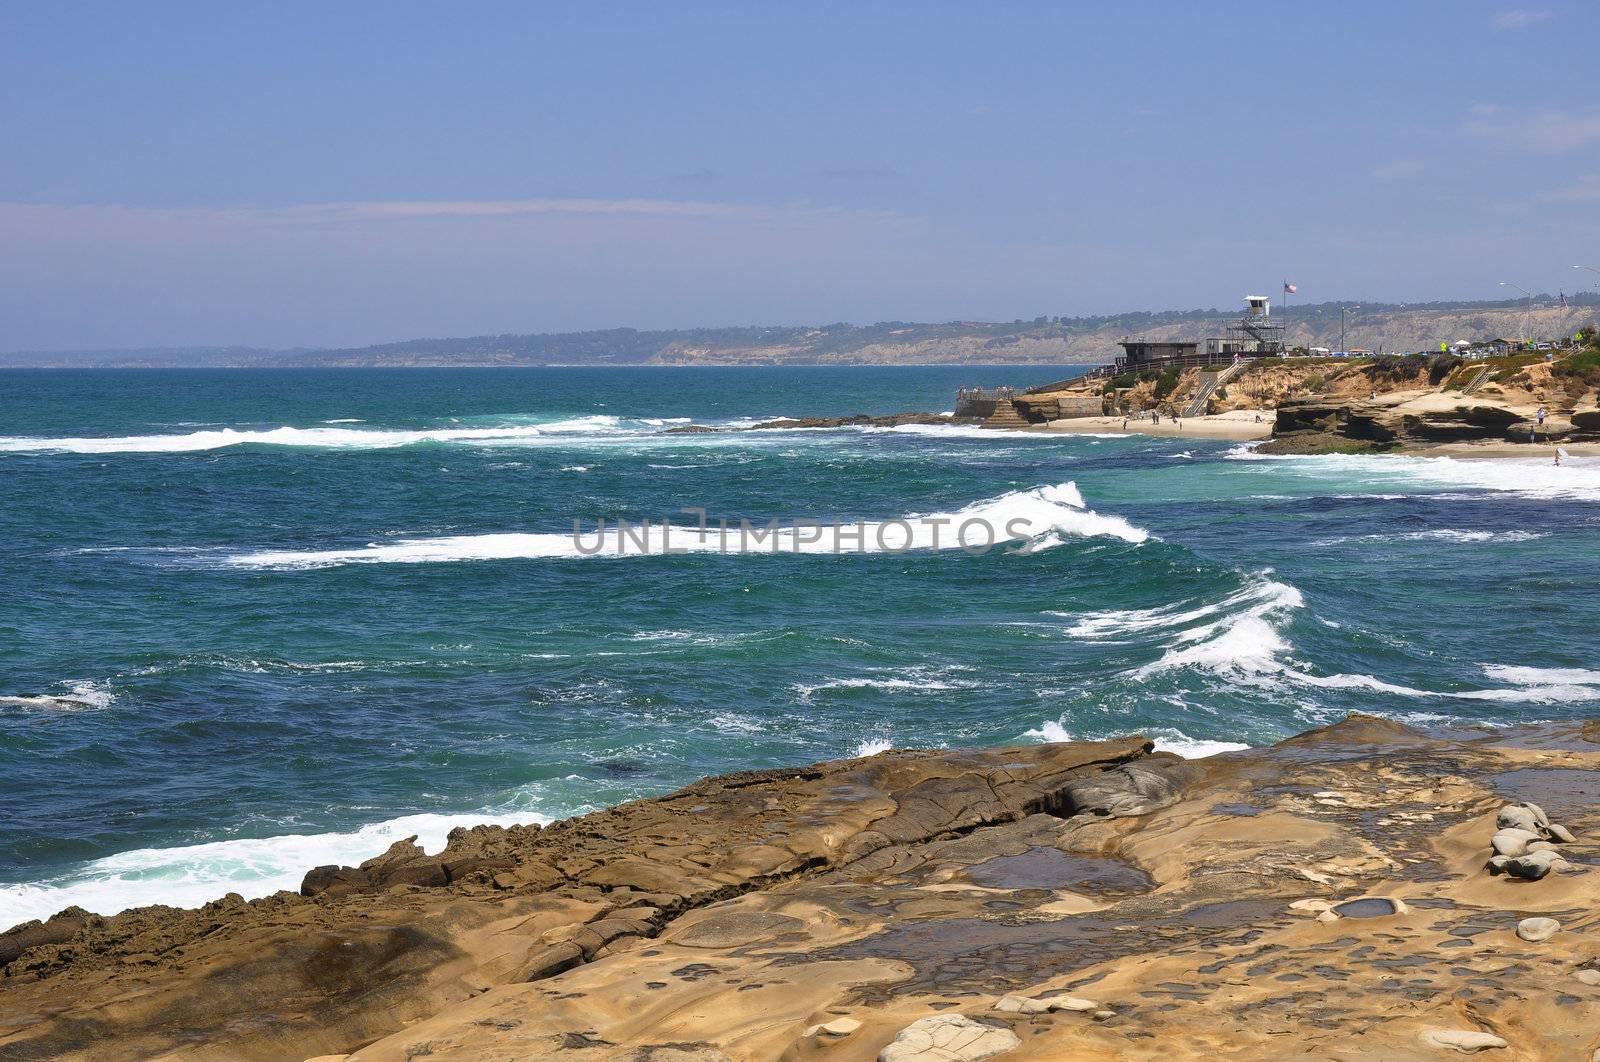 View of the rugged and rocky shoreline which fronts La Jolla, California near San Diego.